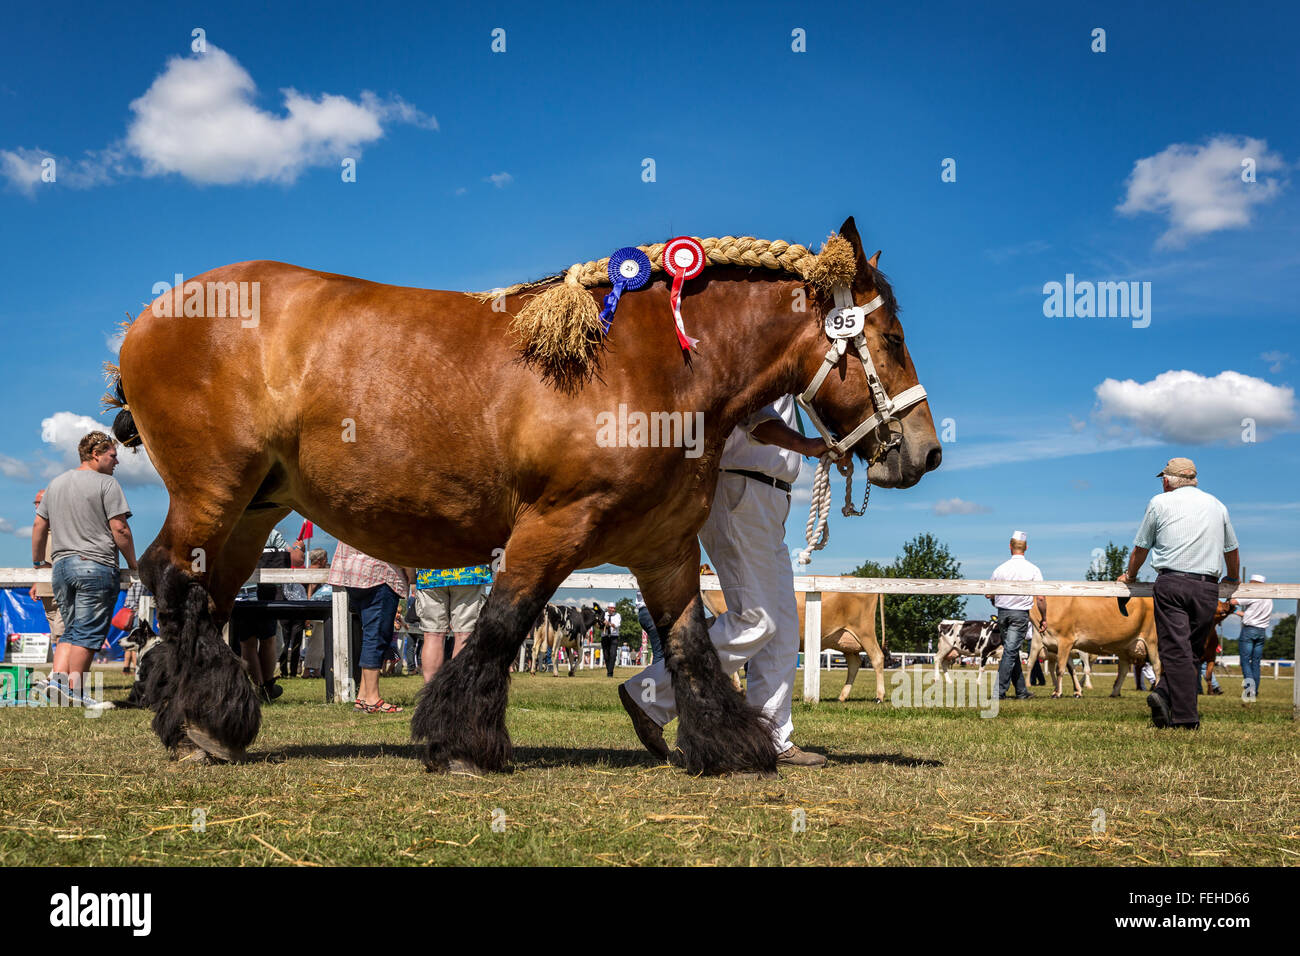 Showing of horses at Funen Agricultural show, Odense, Denmark Stock Photo